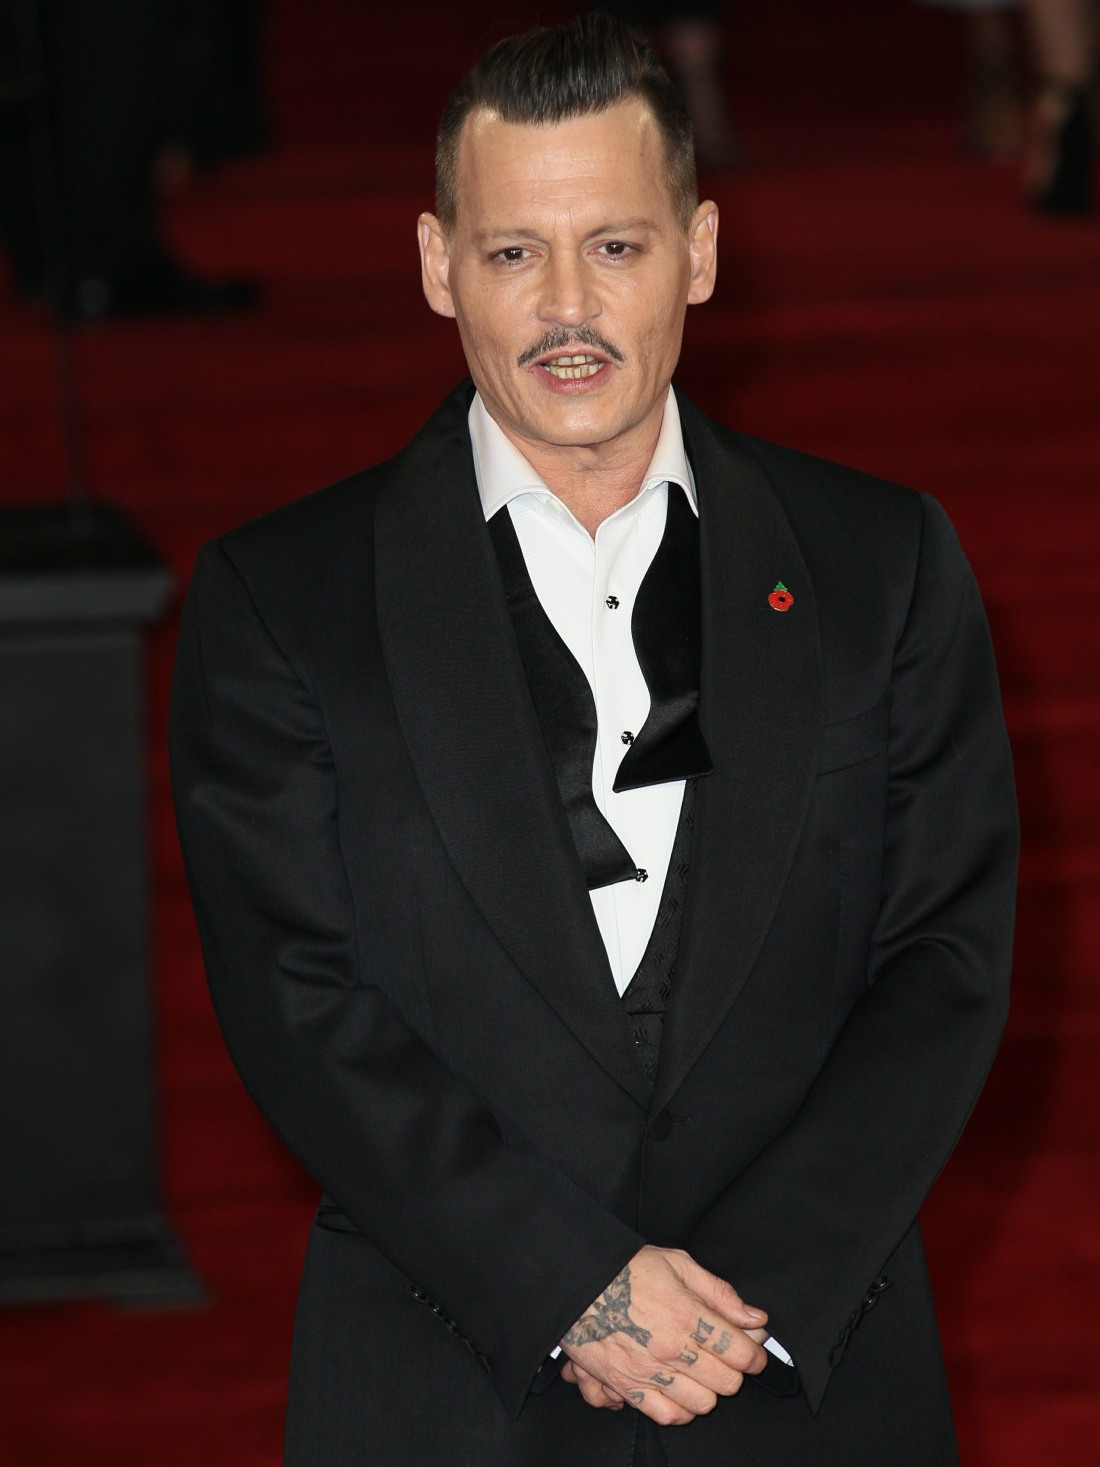 The World Premiere of 'Murder On The Orient Express' held at the Royal Albert Hall